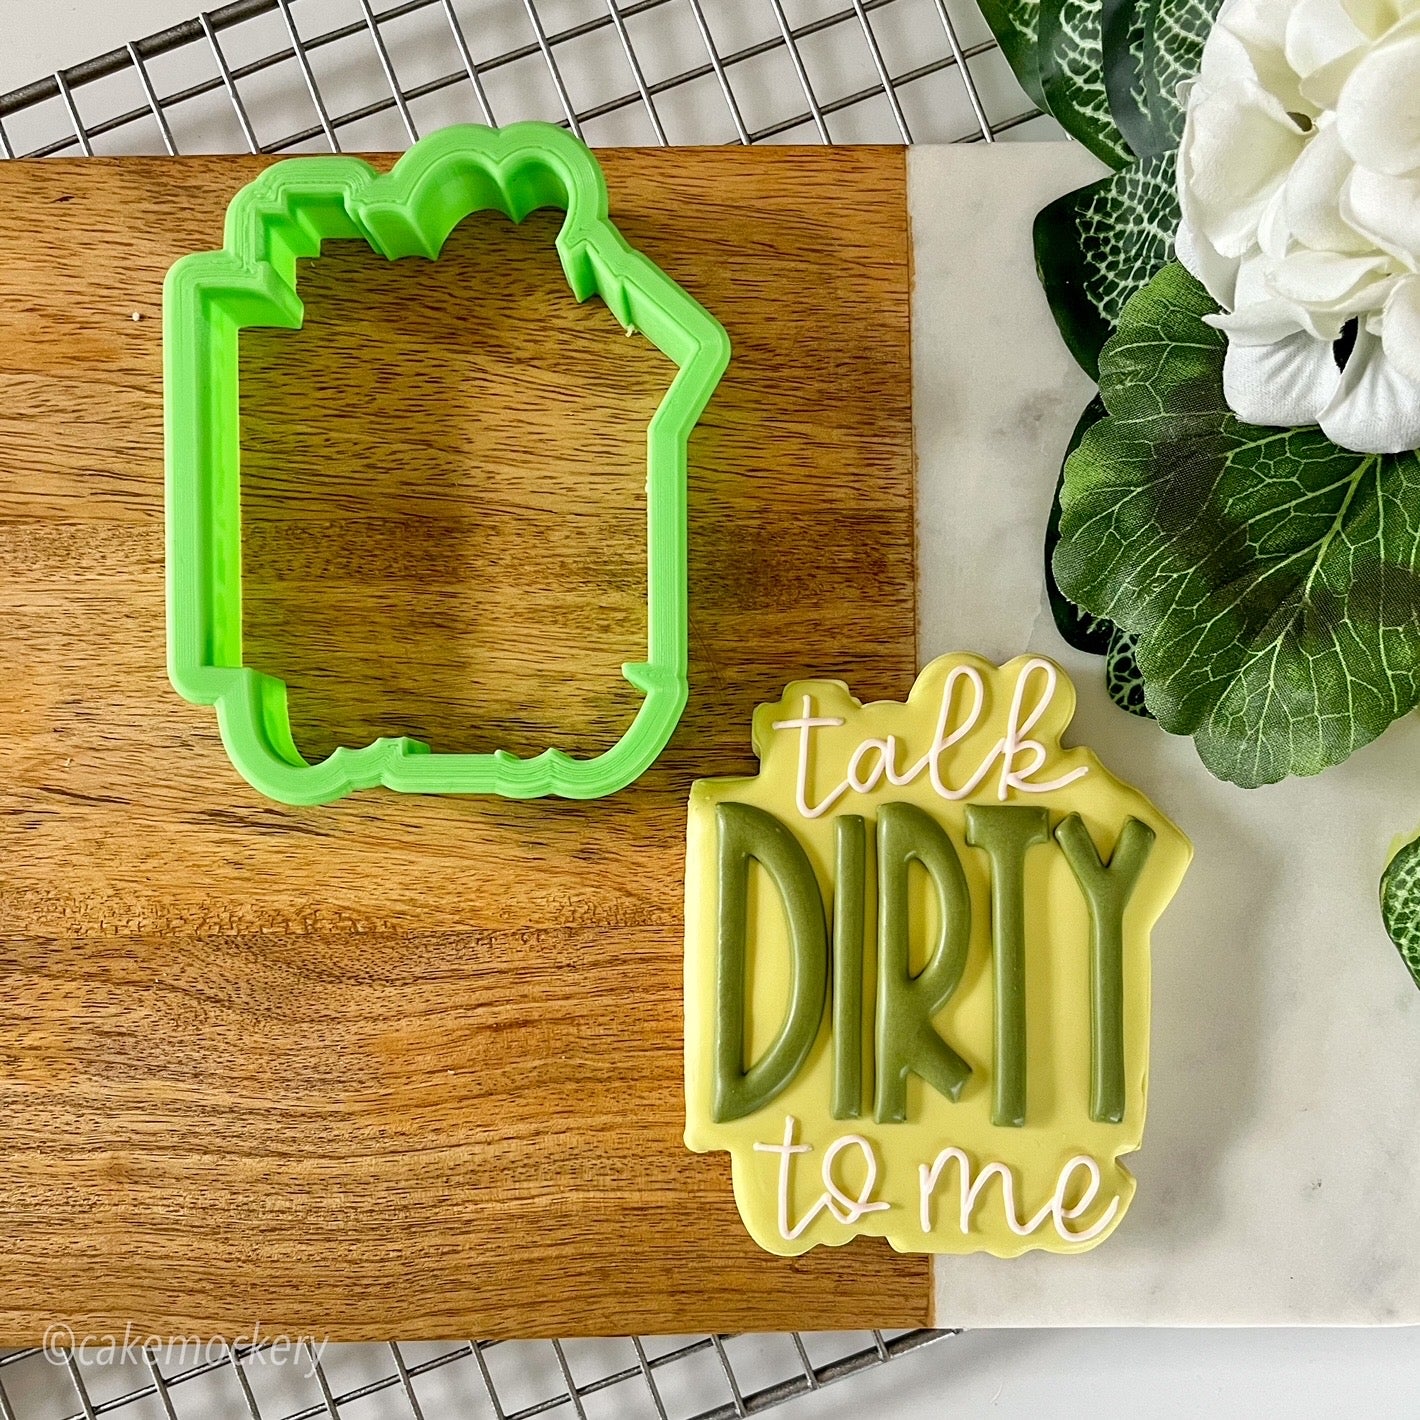 Talk Dirty To Me Lettering Cookie Cutter